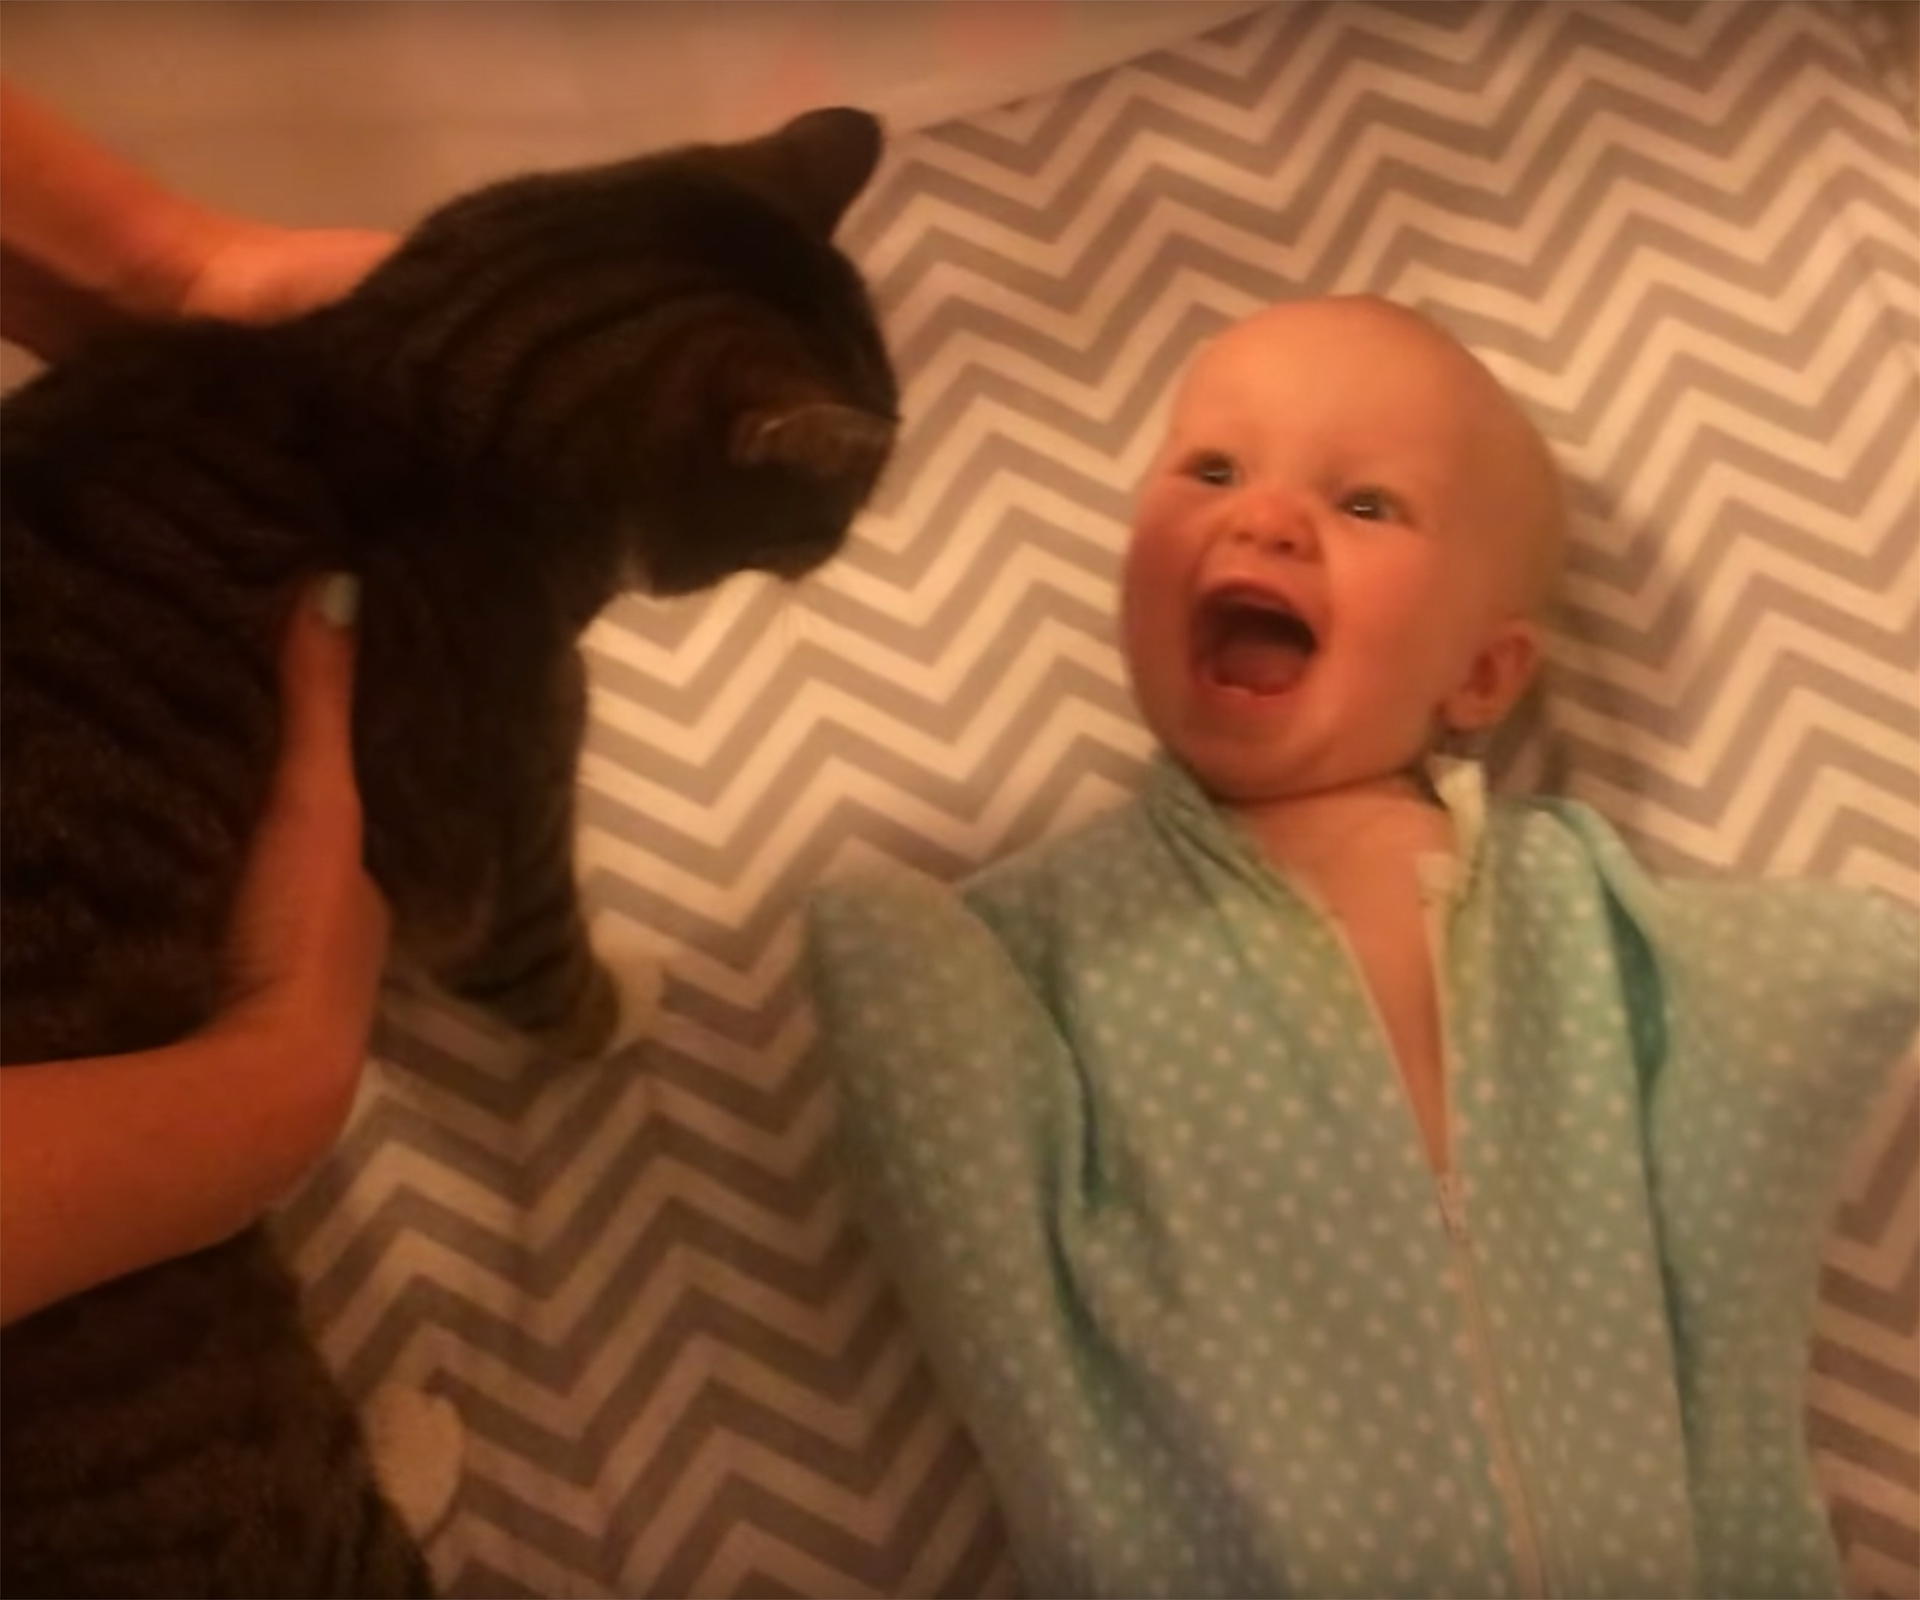 This baby really, REALLY loves her cat